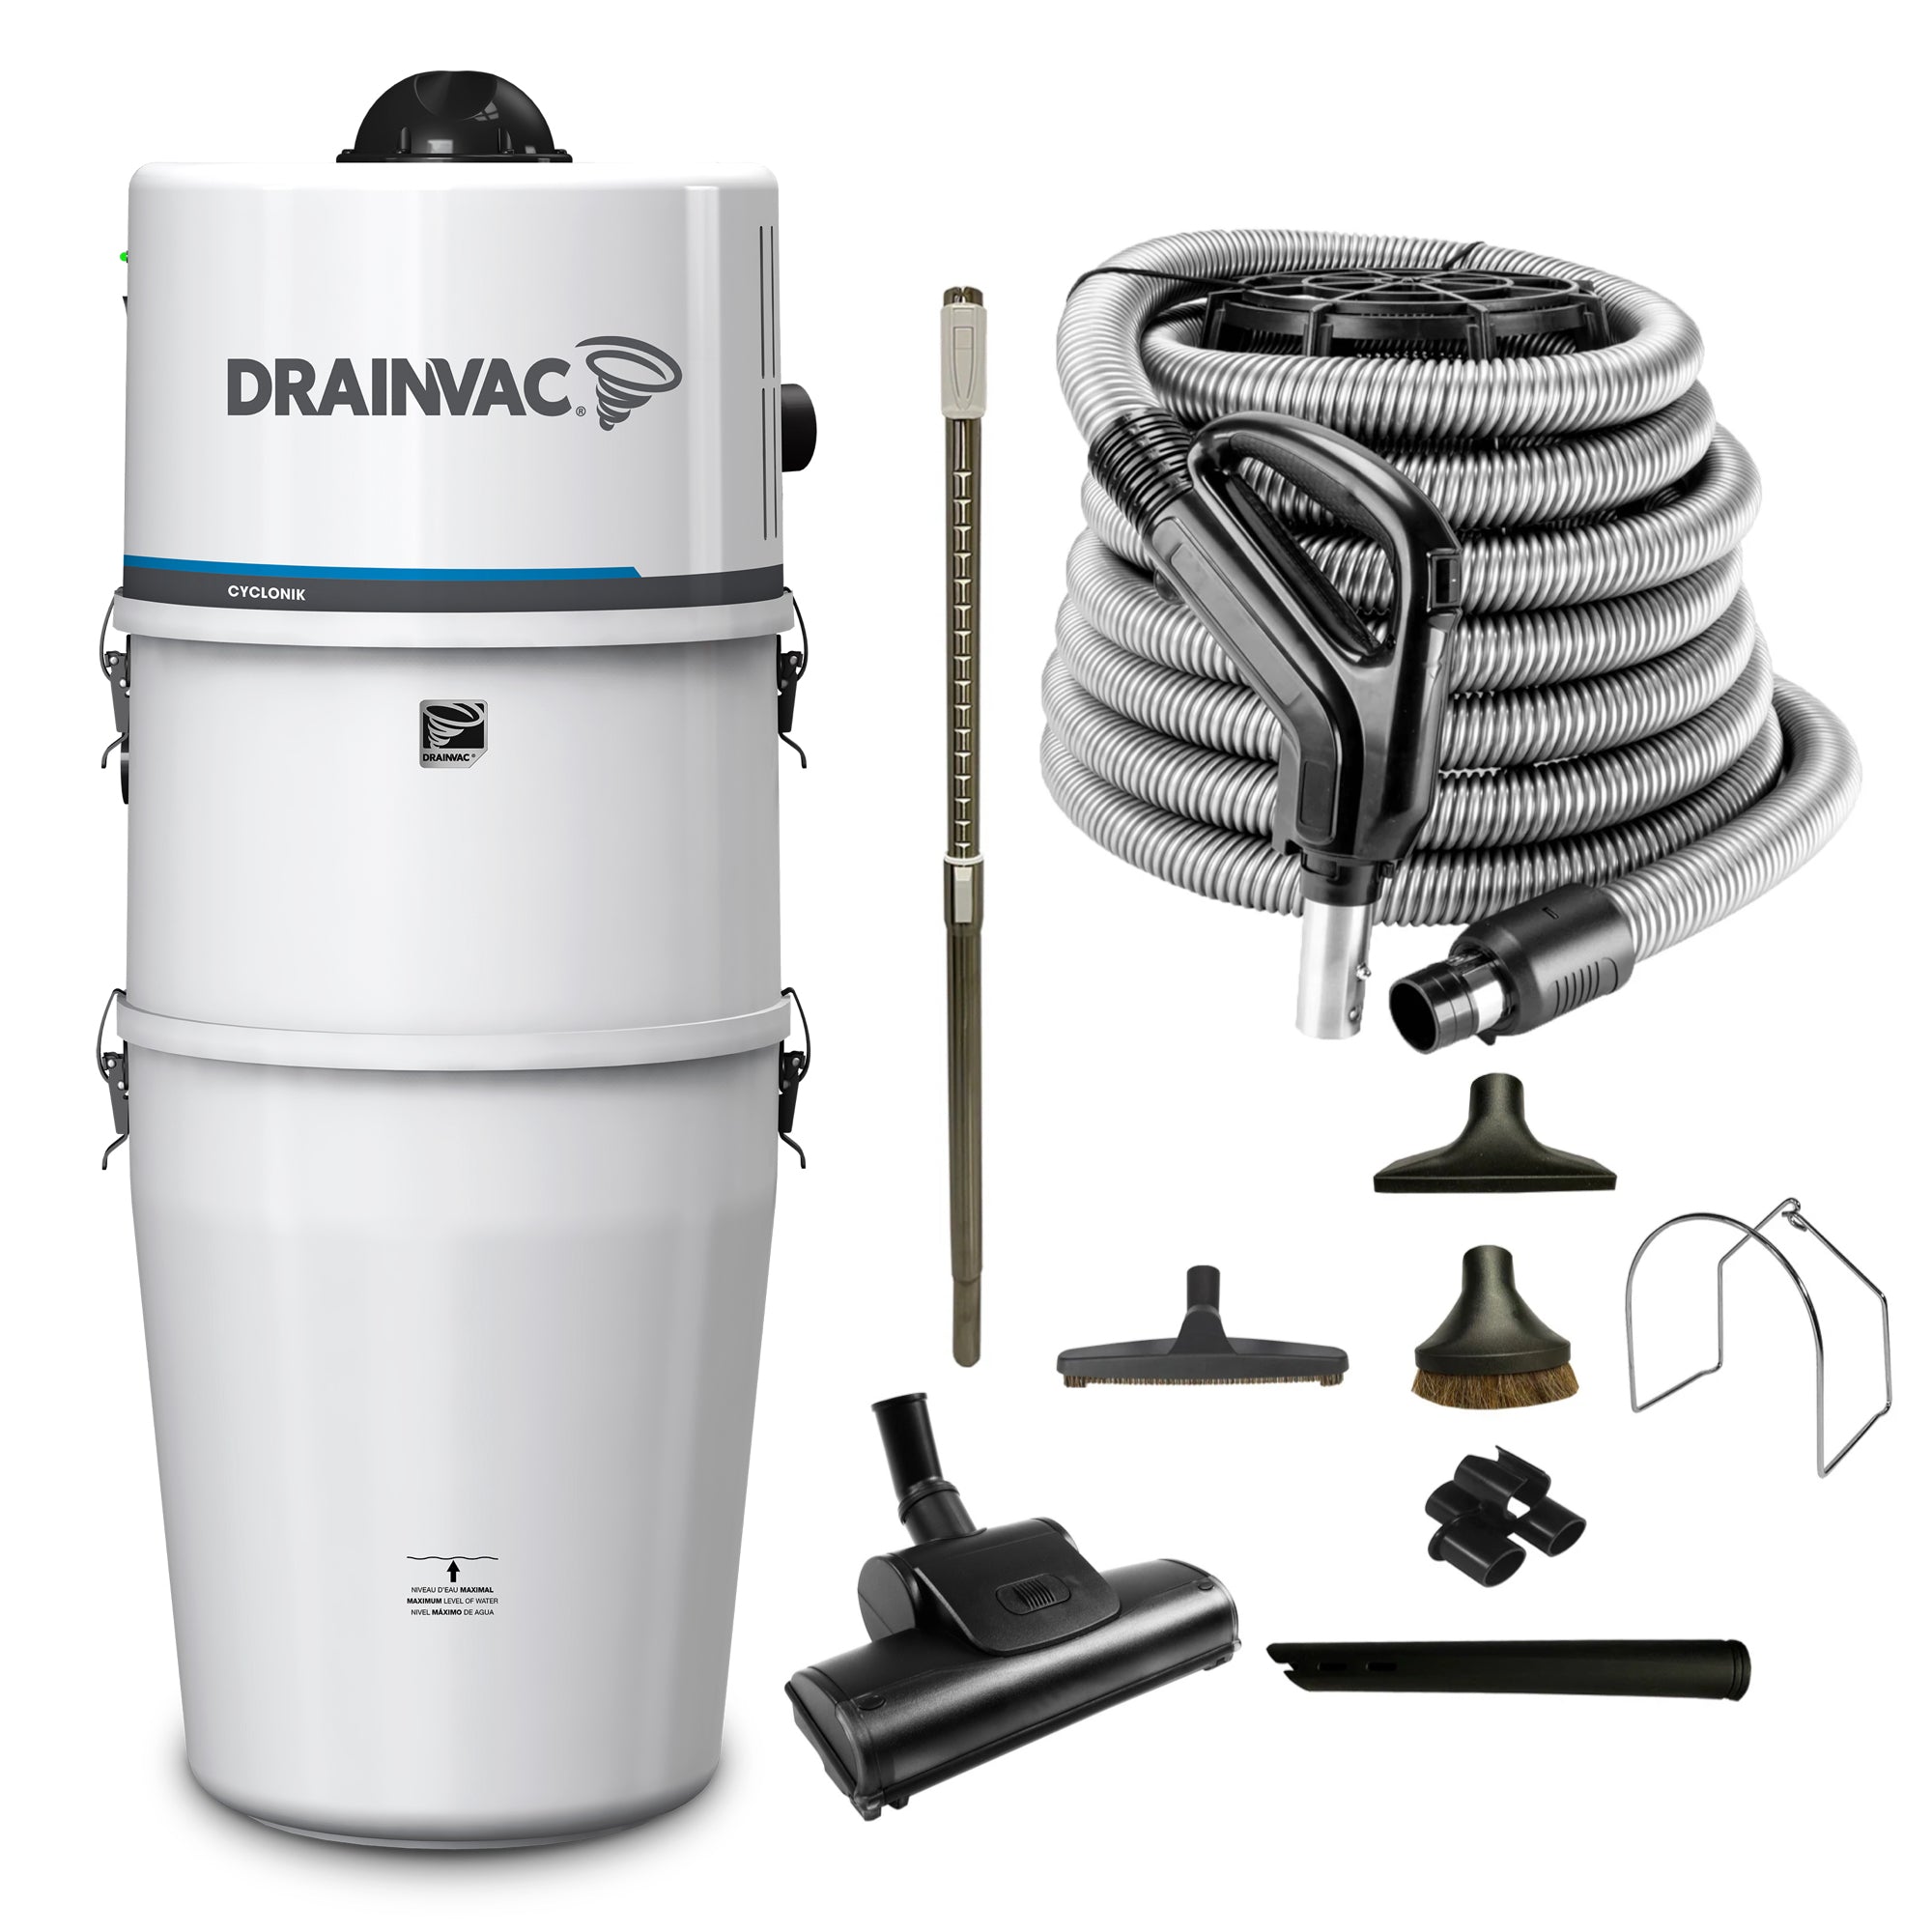 DrainVac Cyclonik Central Vacuum with Deluxe Air Package